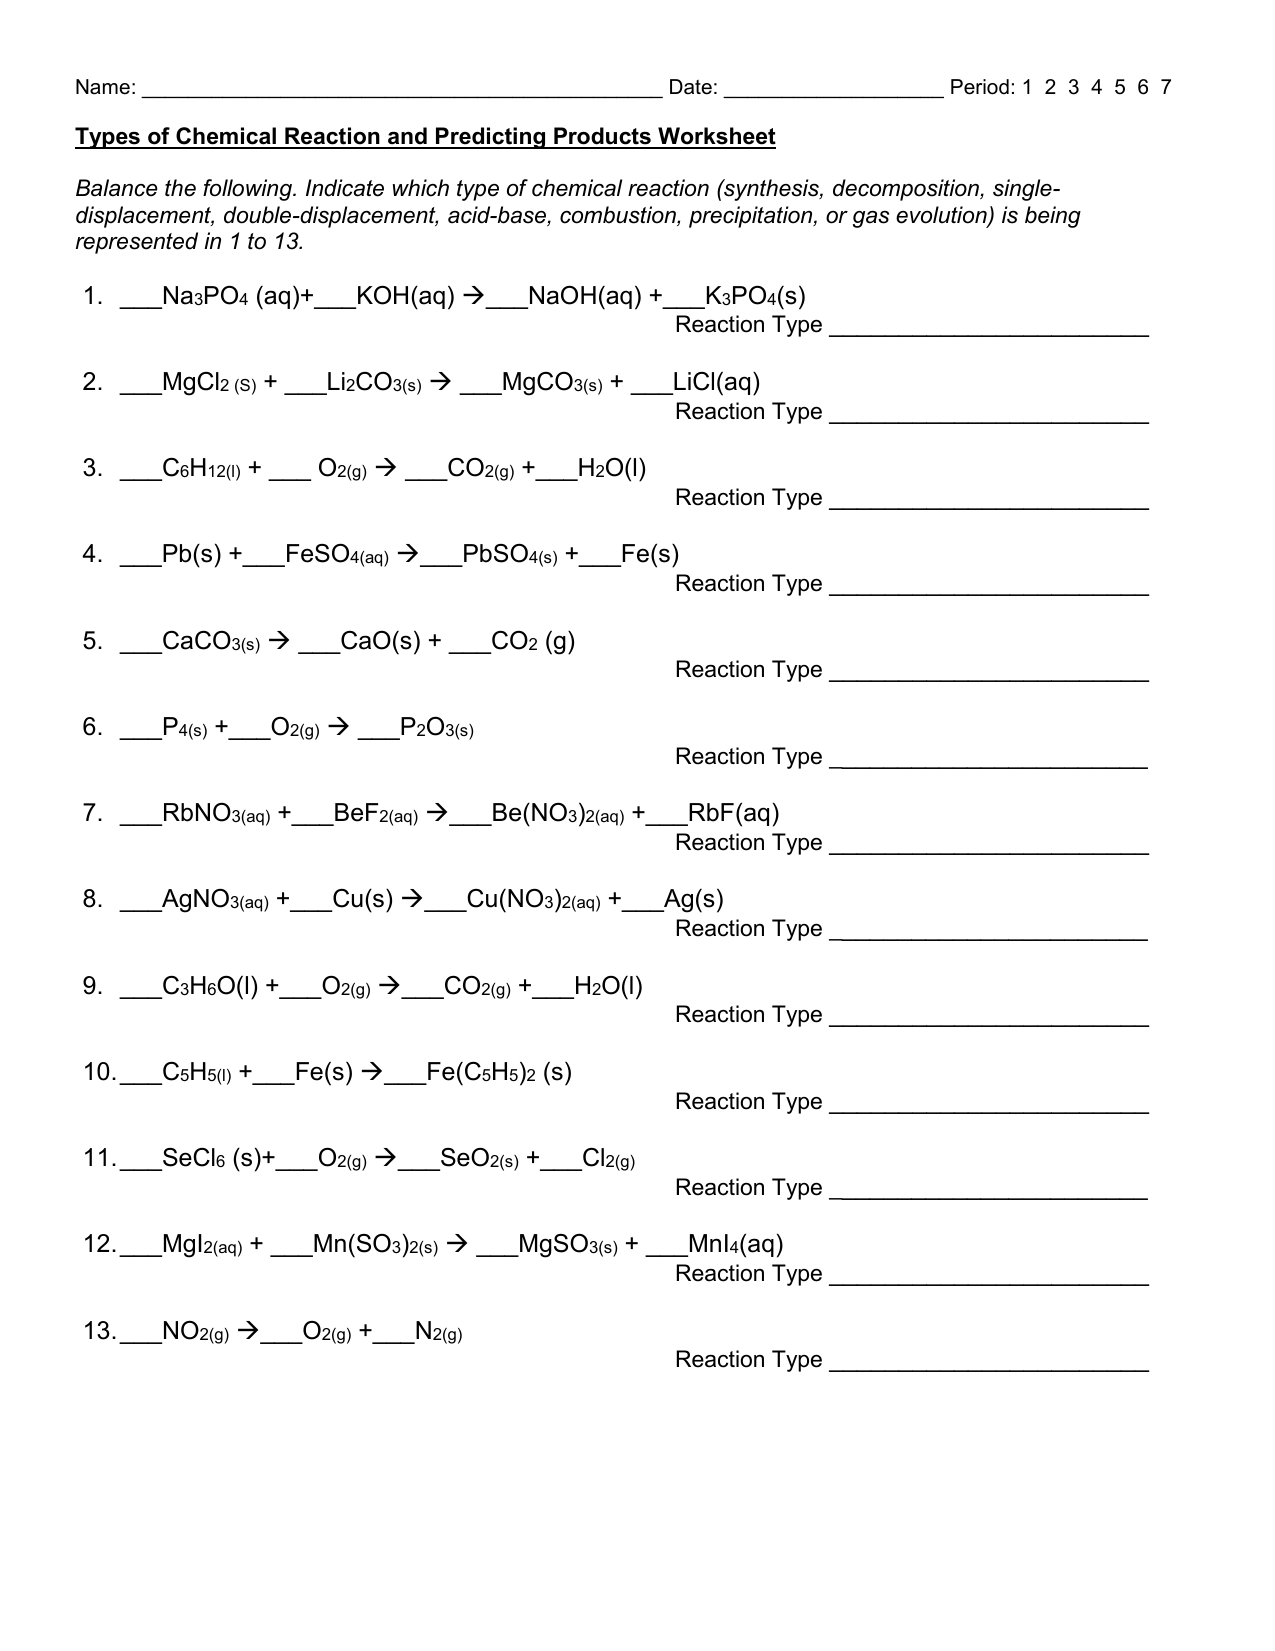 Predicting products for single replacement reactions worksheet 1 answers